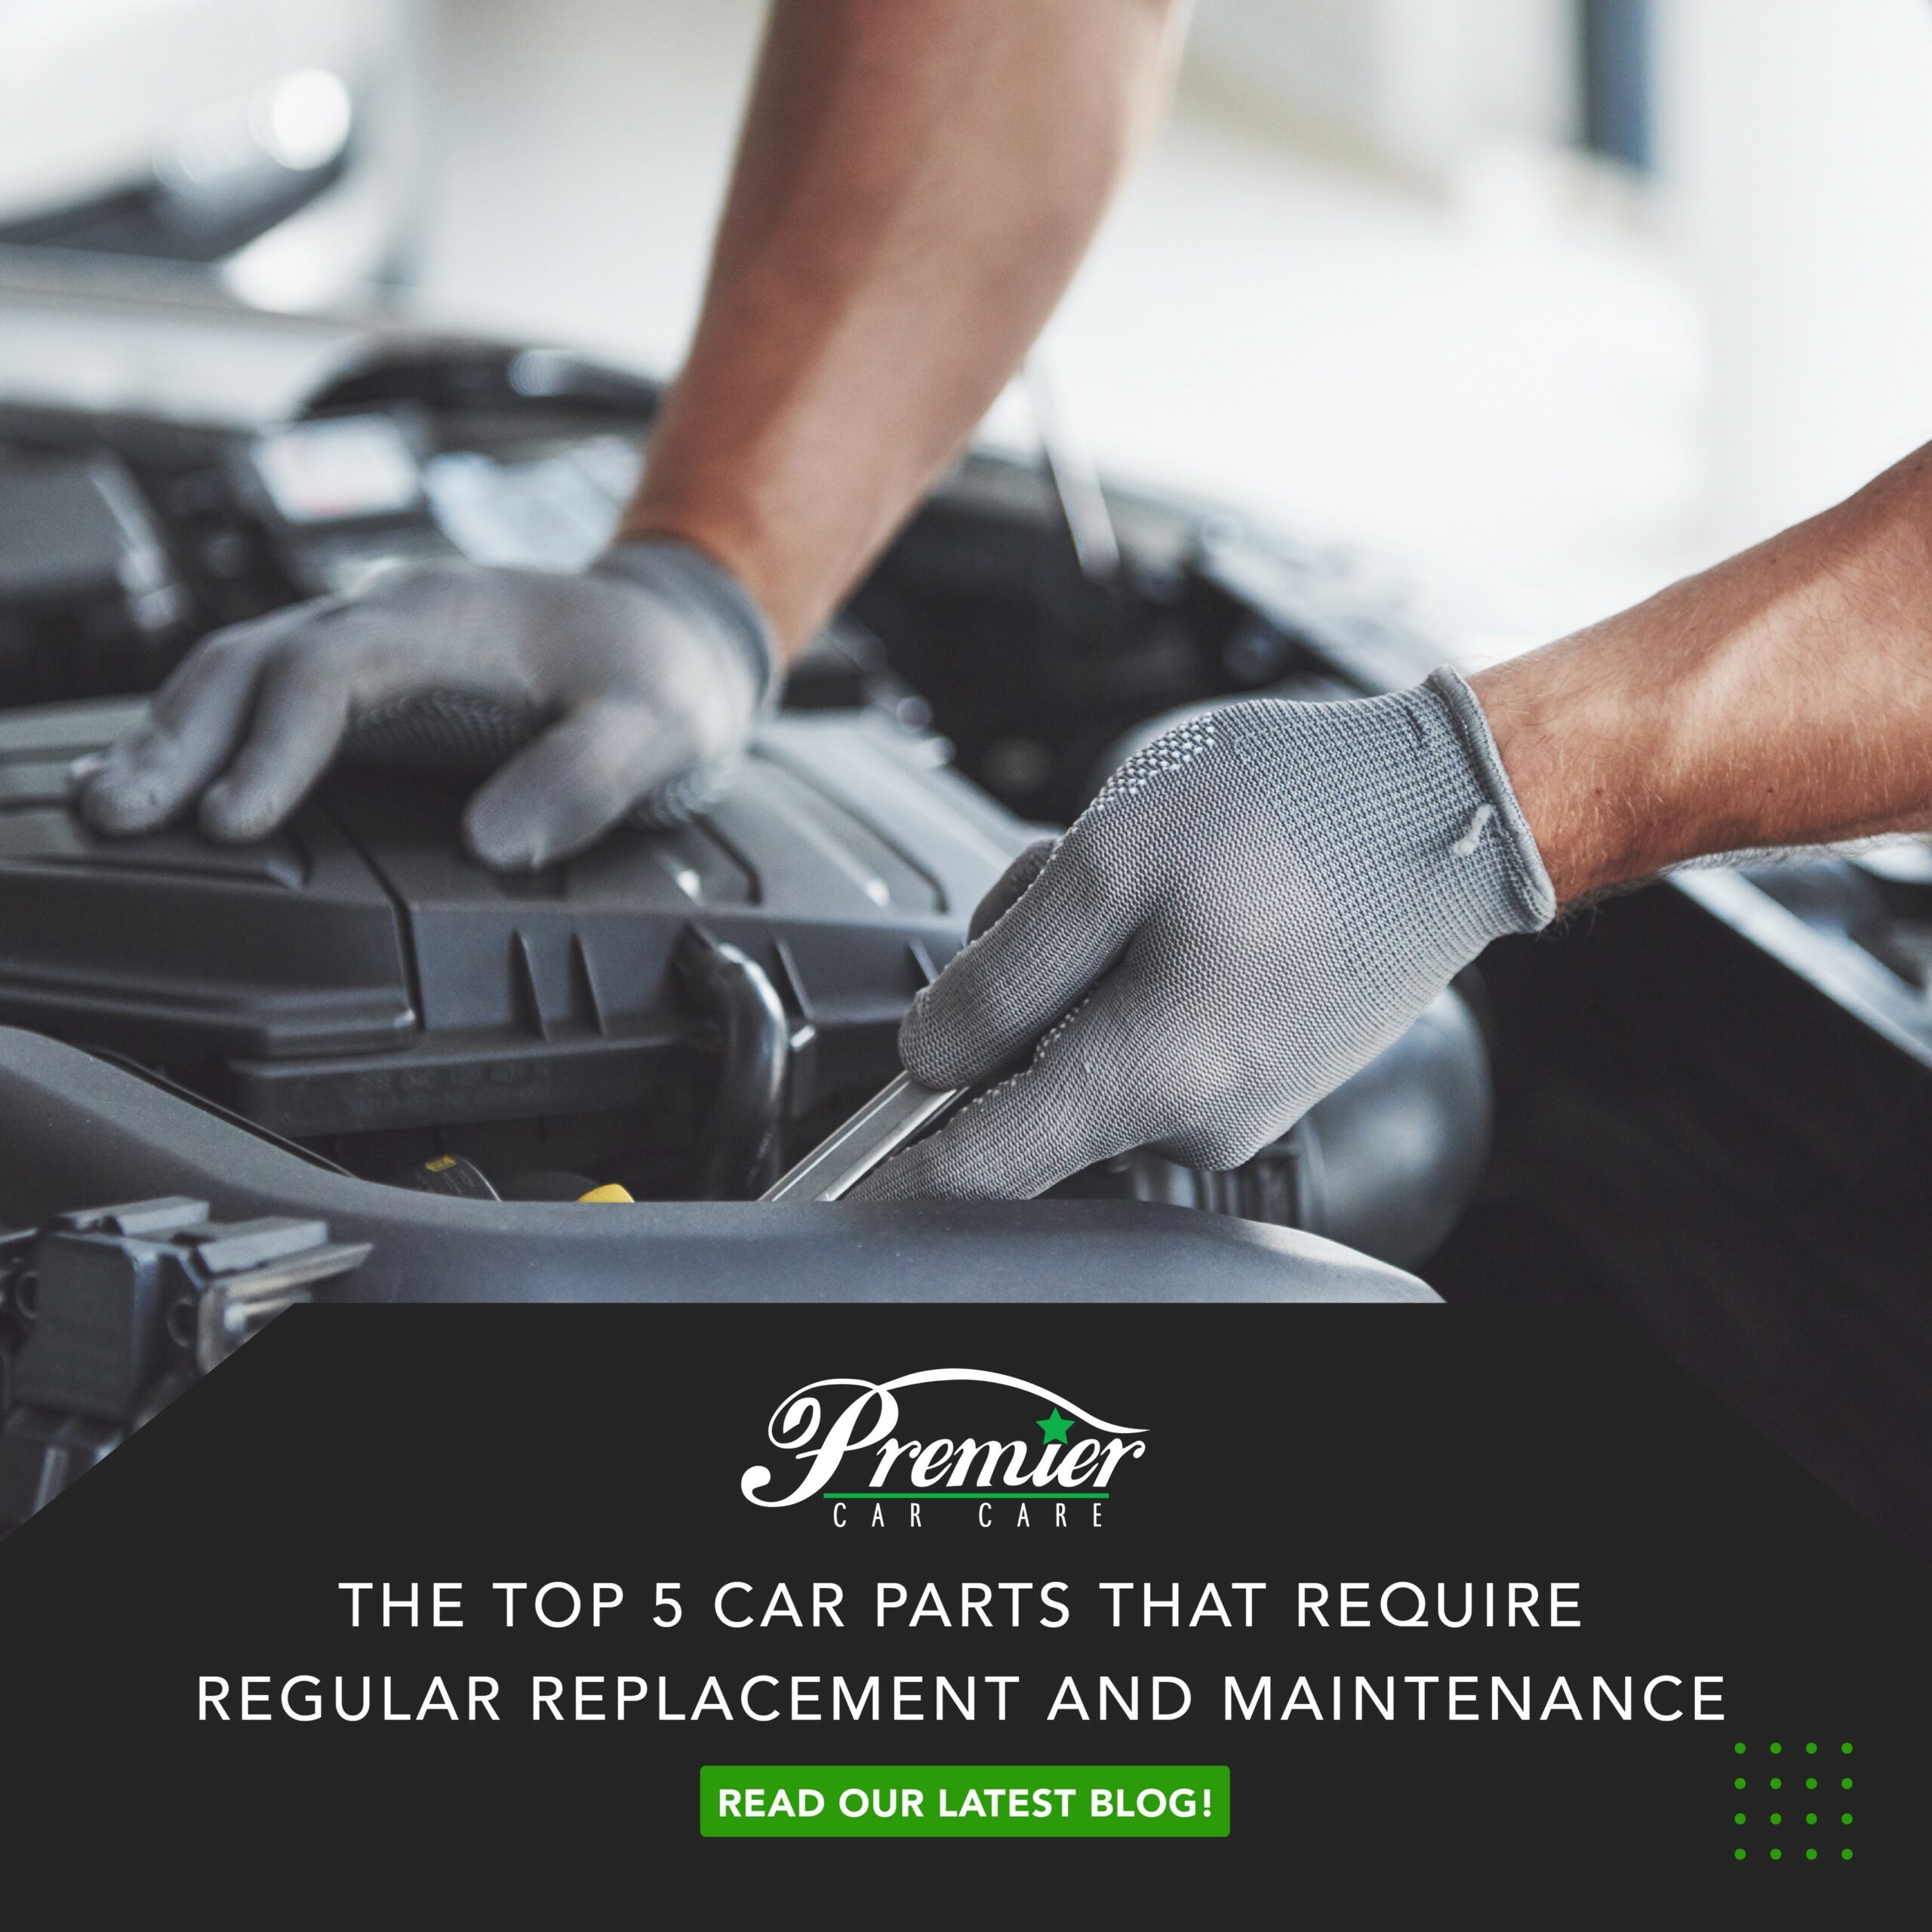 Car Parts that require regular replacement and maintenance